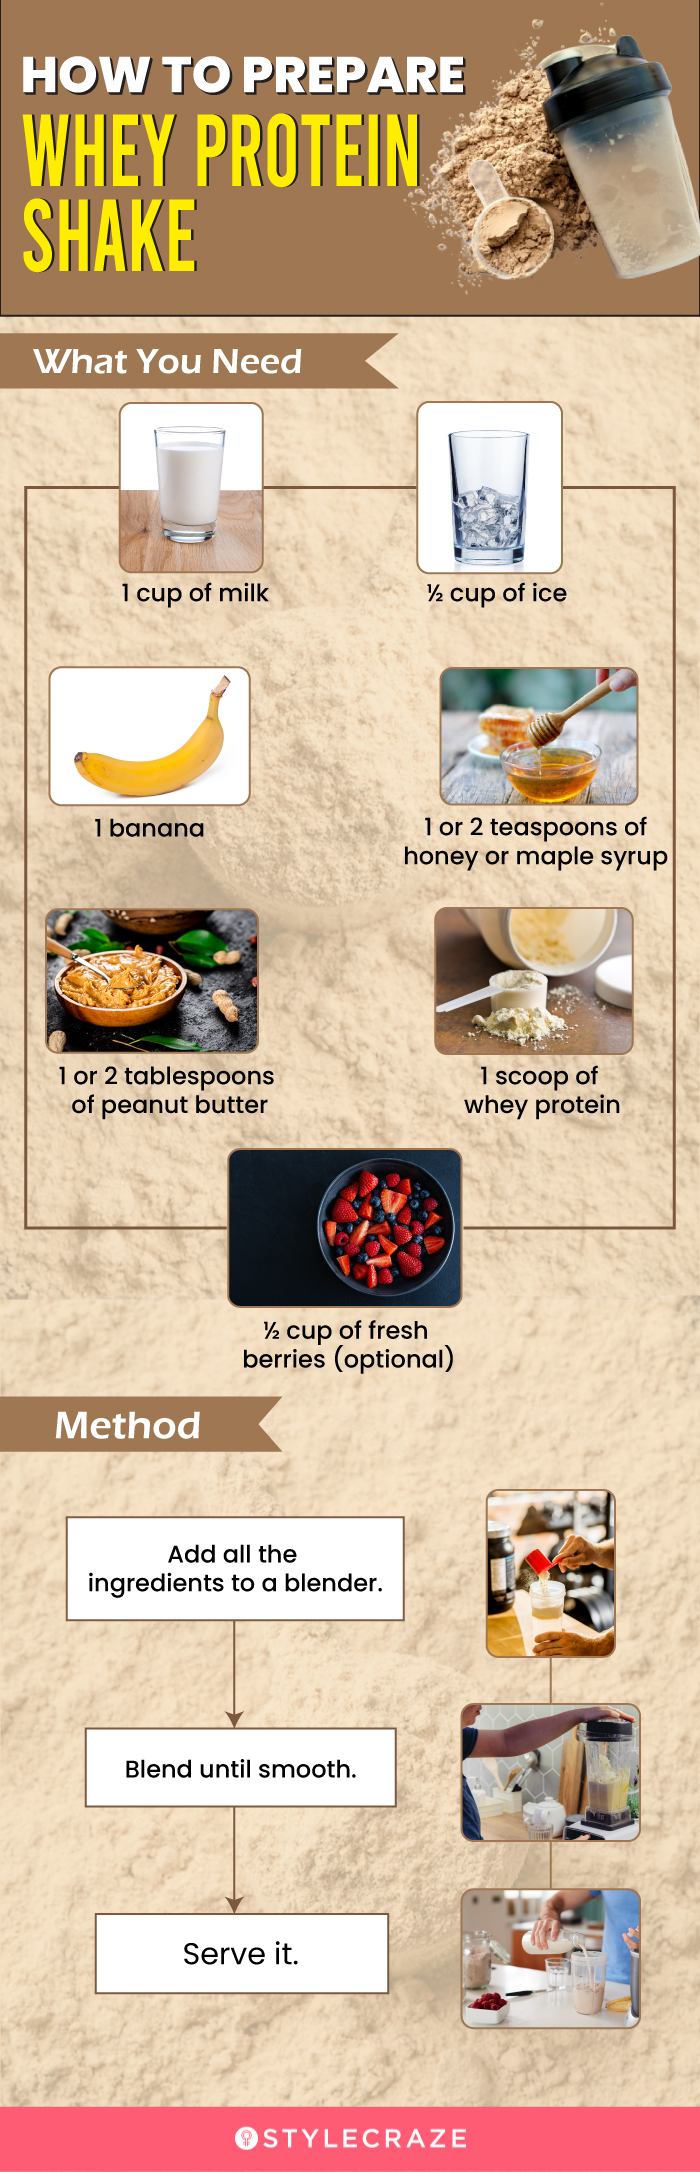 how to prepare whey protein shake (infographic)